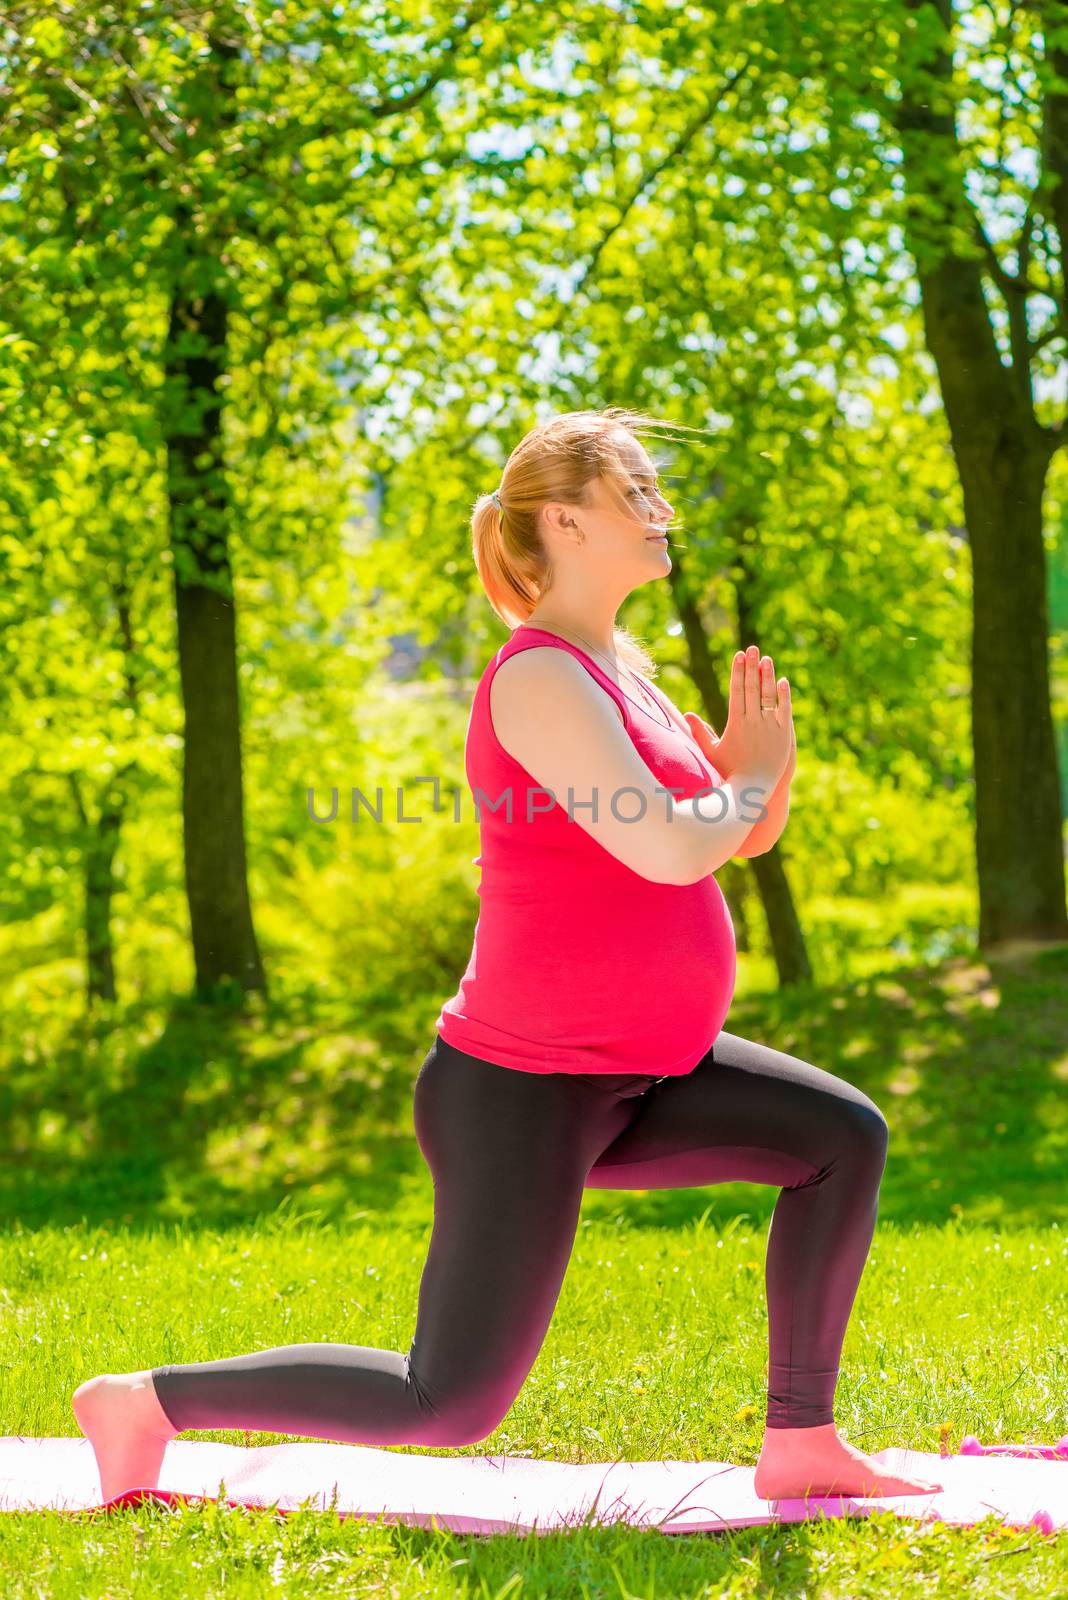 athletic girl leads an active lifestyle during pregnancy by kosmsos111